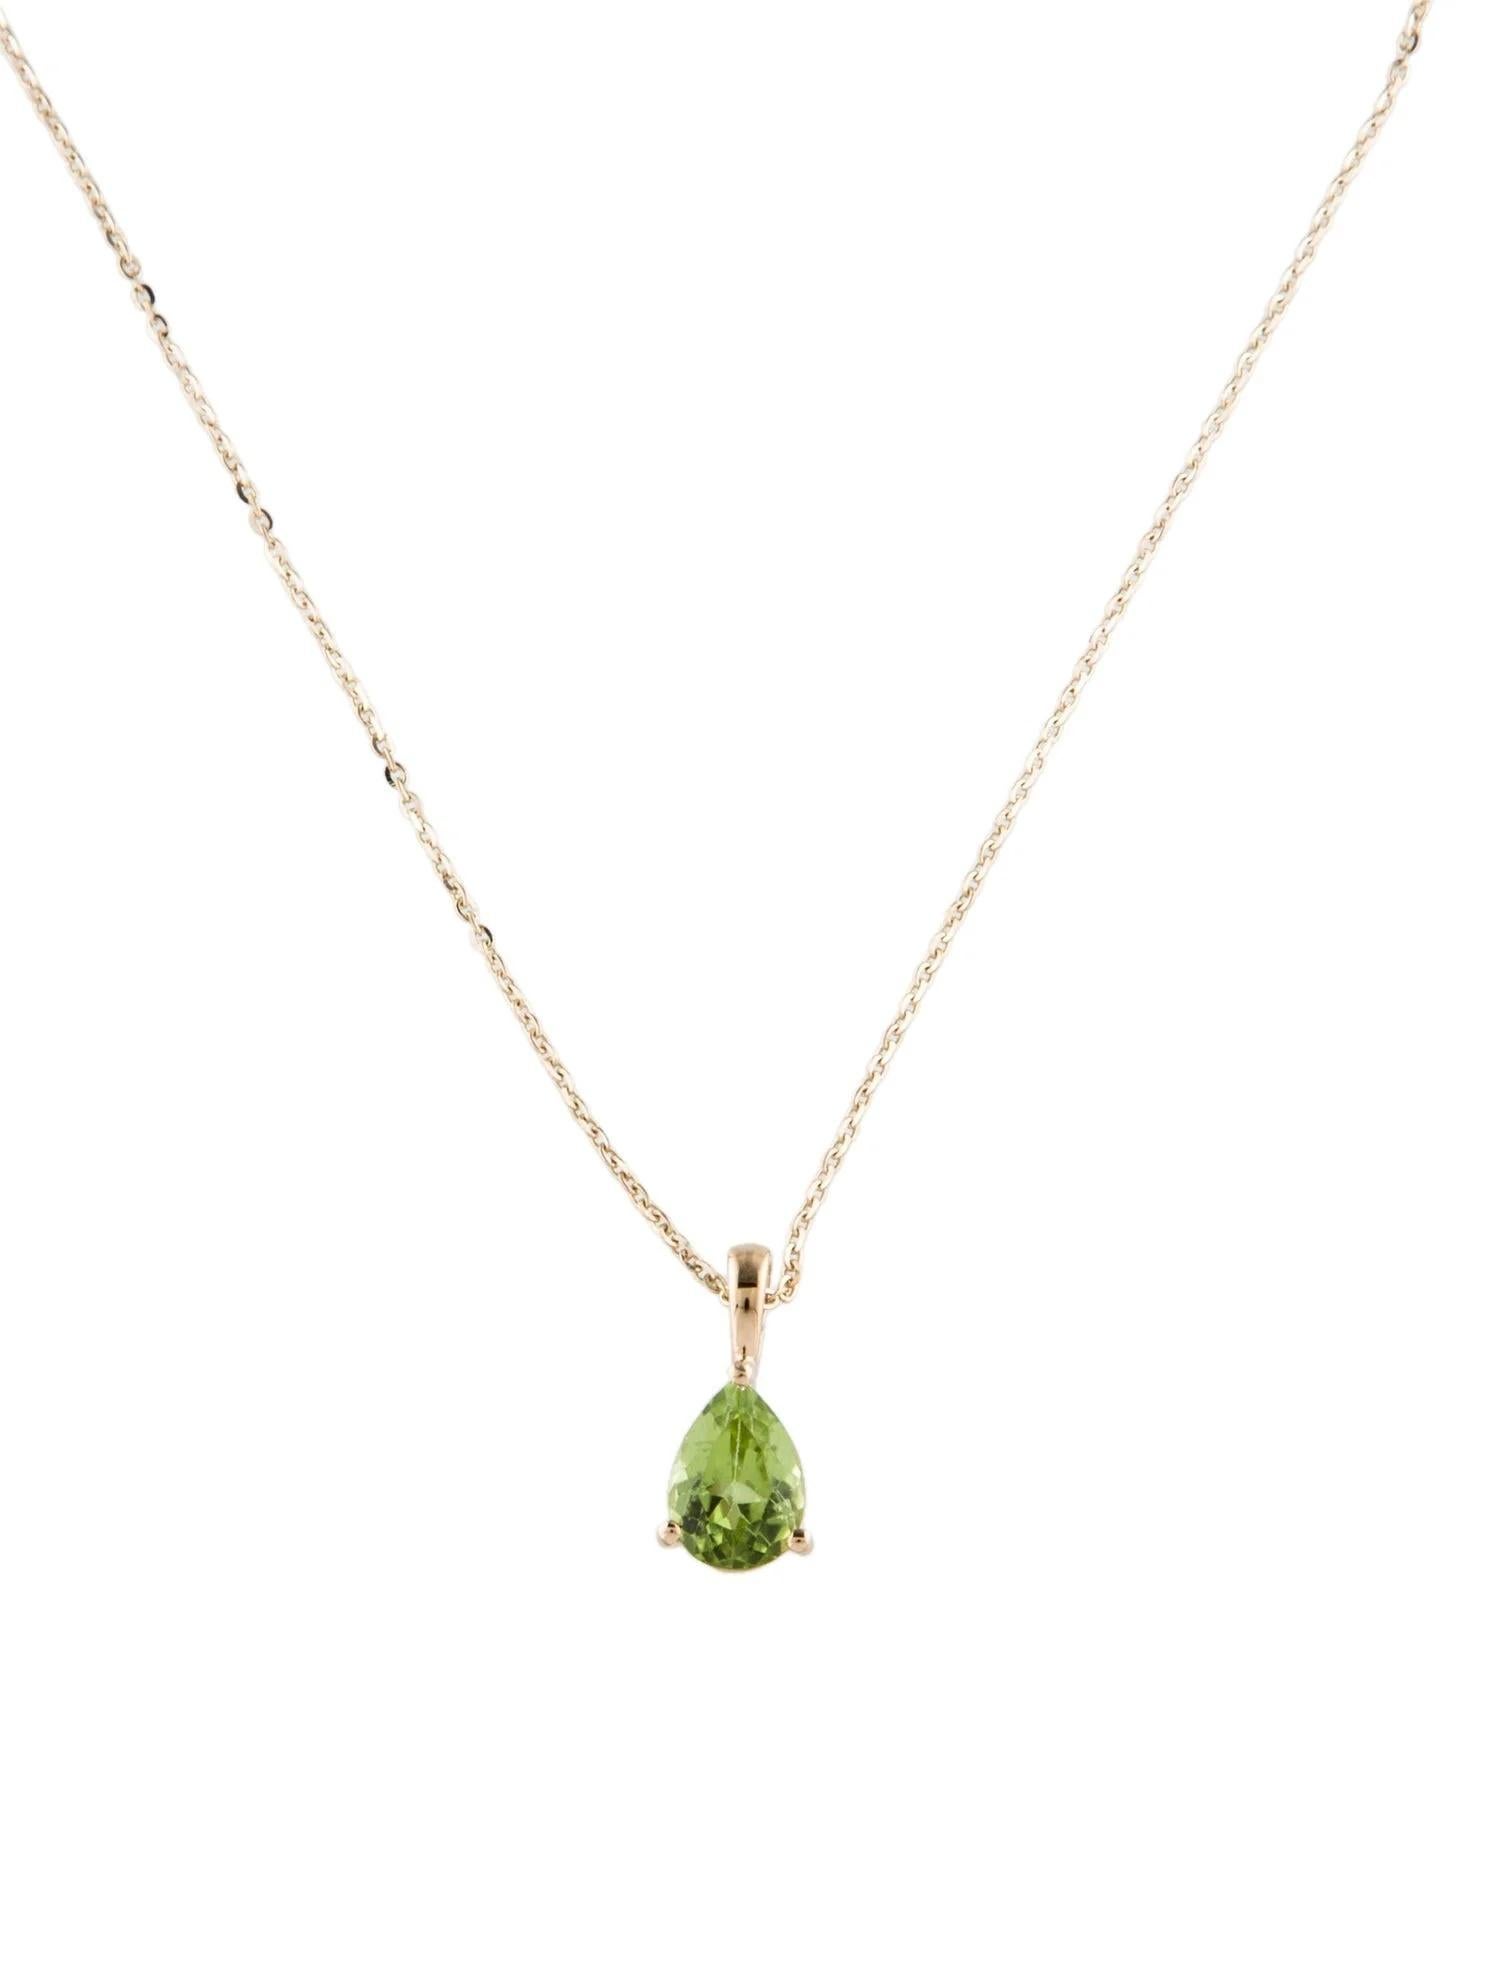 Indulge in timeless elegance with this exquisite 14K Yellow Gold Peridot Pendant Necklace. Crafted to perfection, this piece boasts a stunning Pear Modified Brilliant Peridot gemstone, radiating a captivating green hue. Here are the